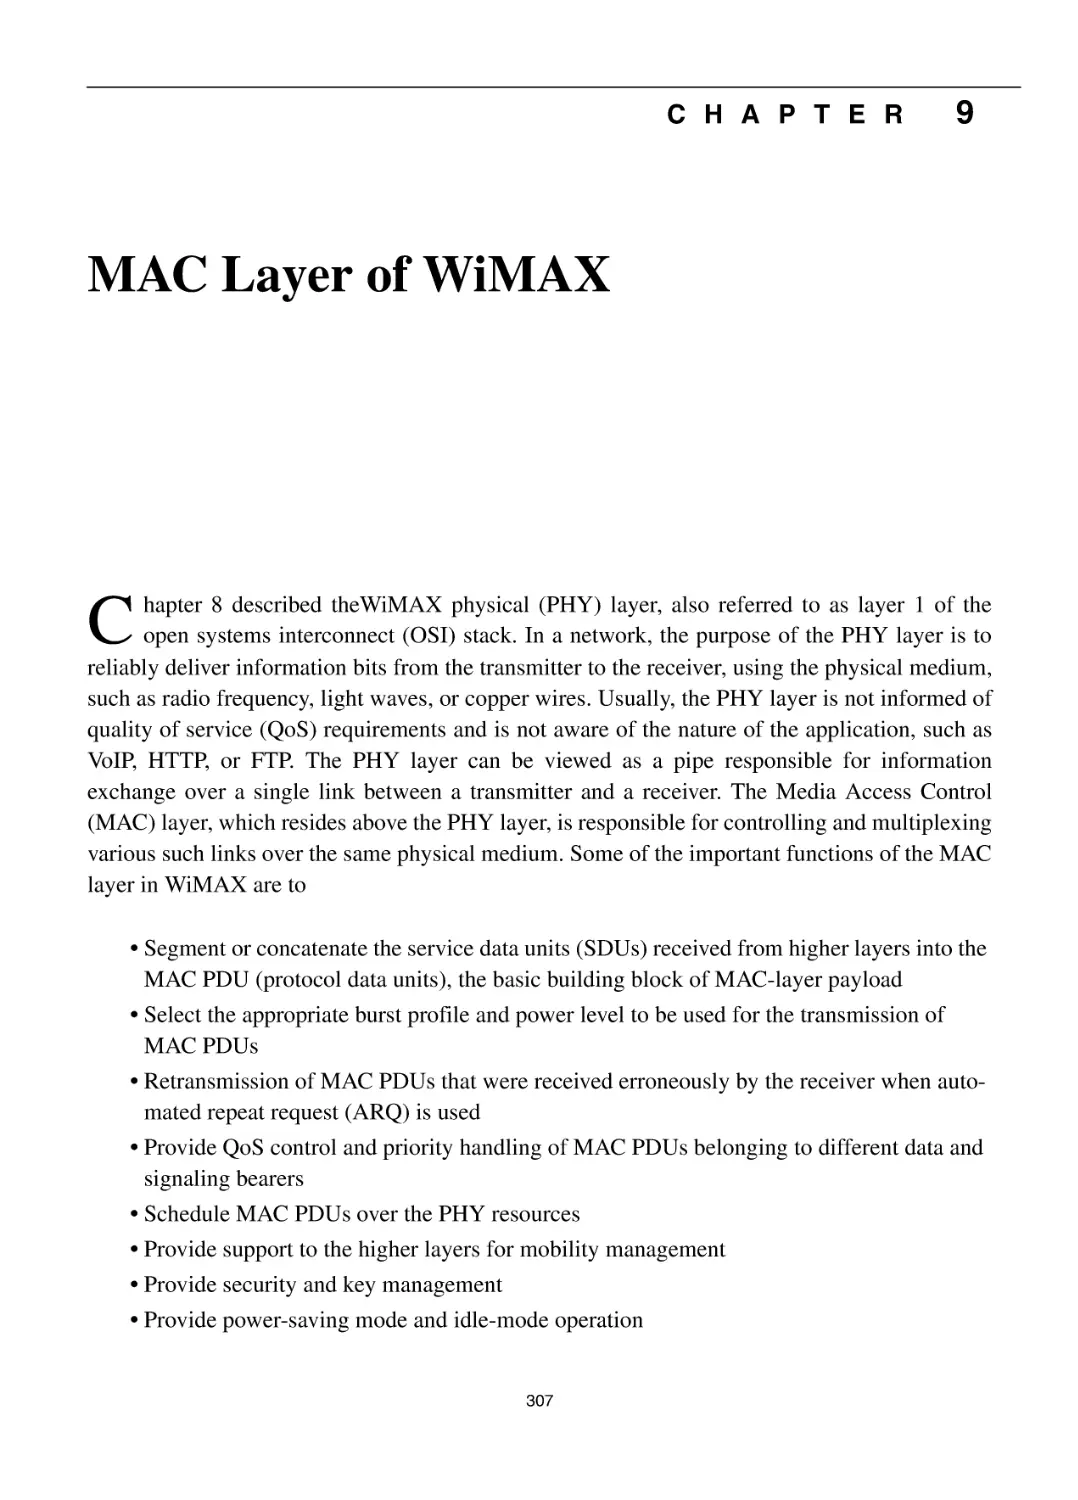 Chapter 9 MAC Layer of WiMAX